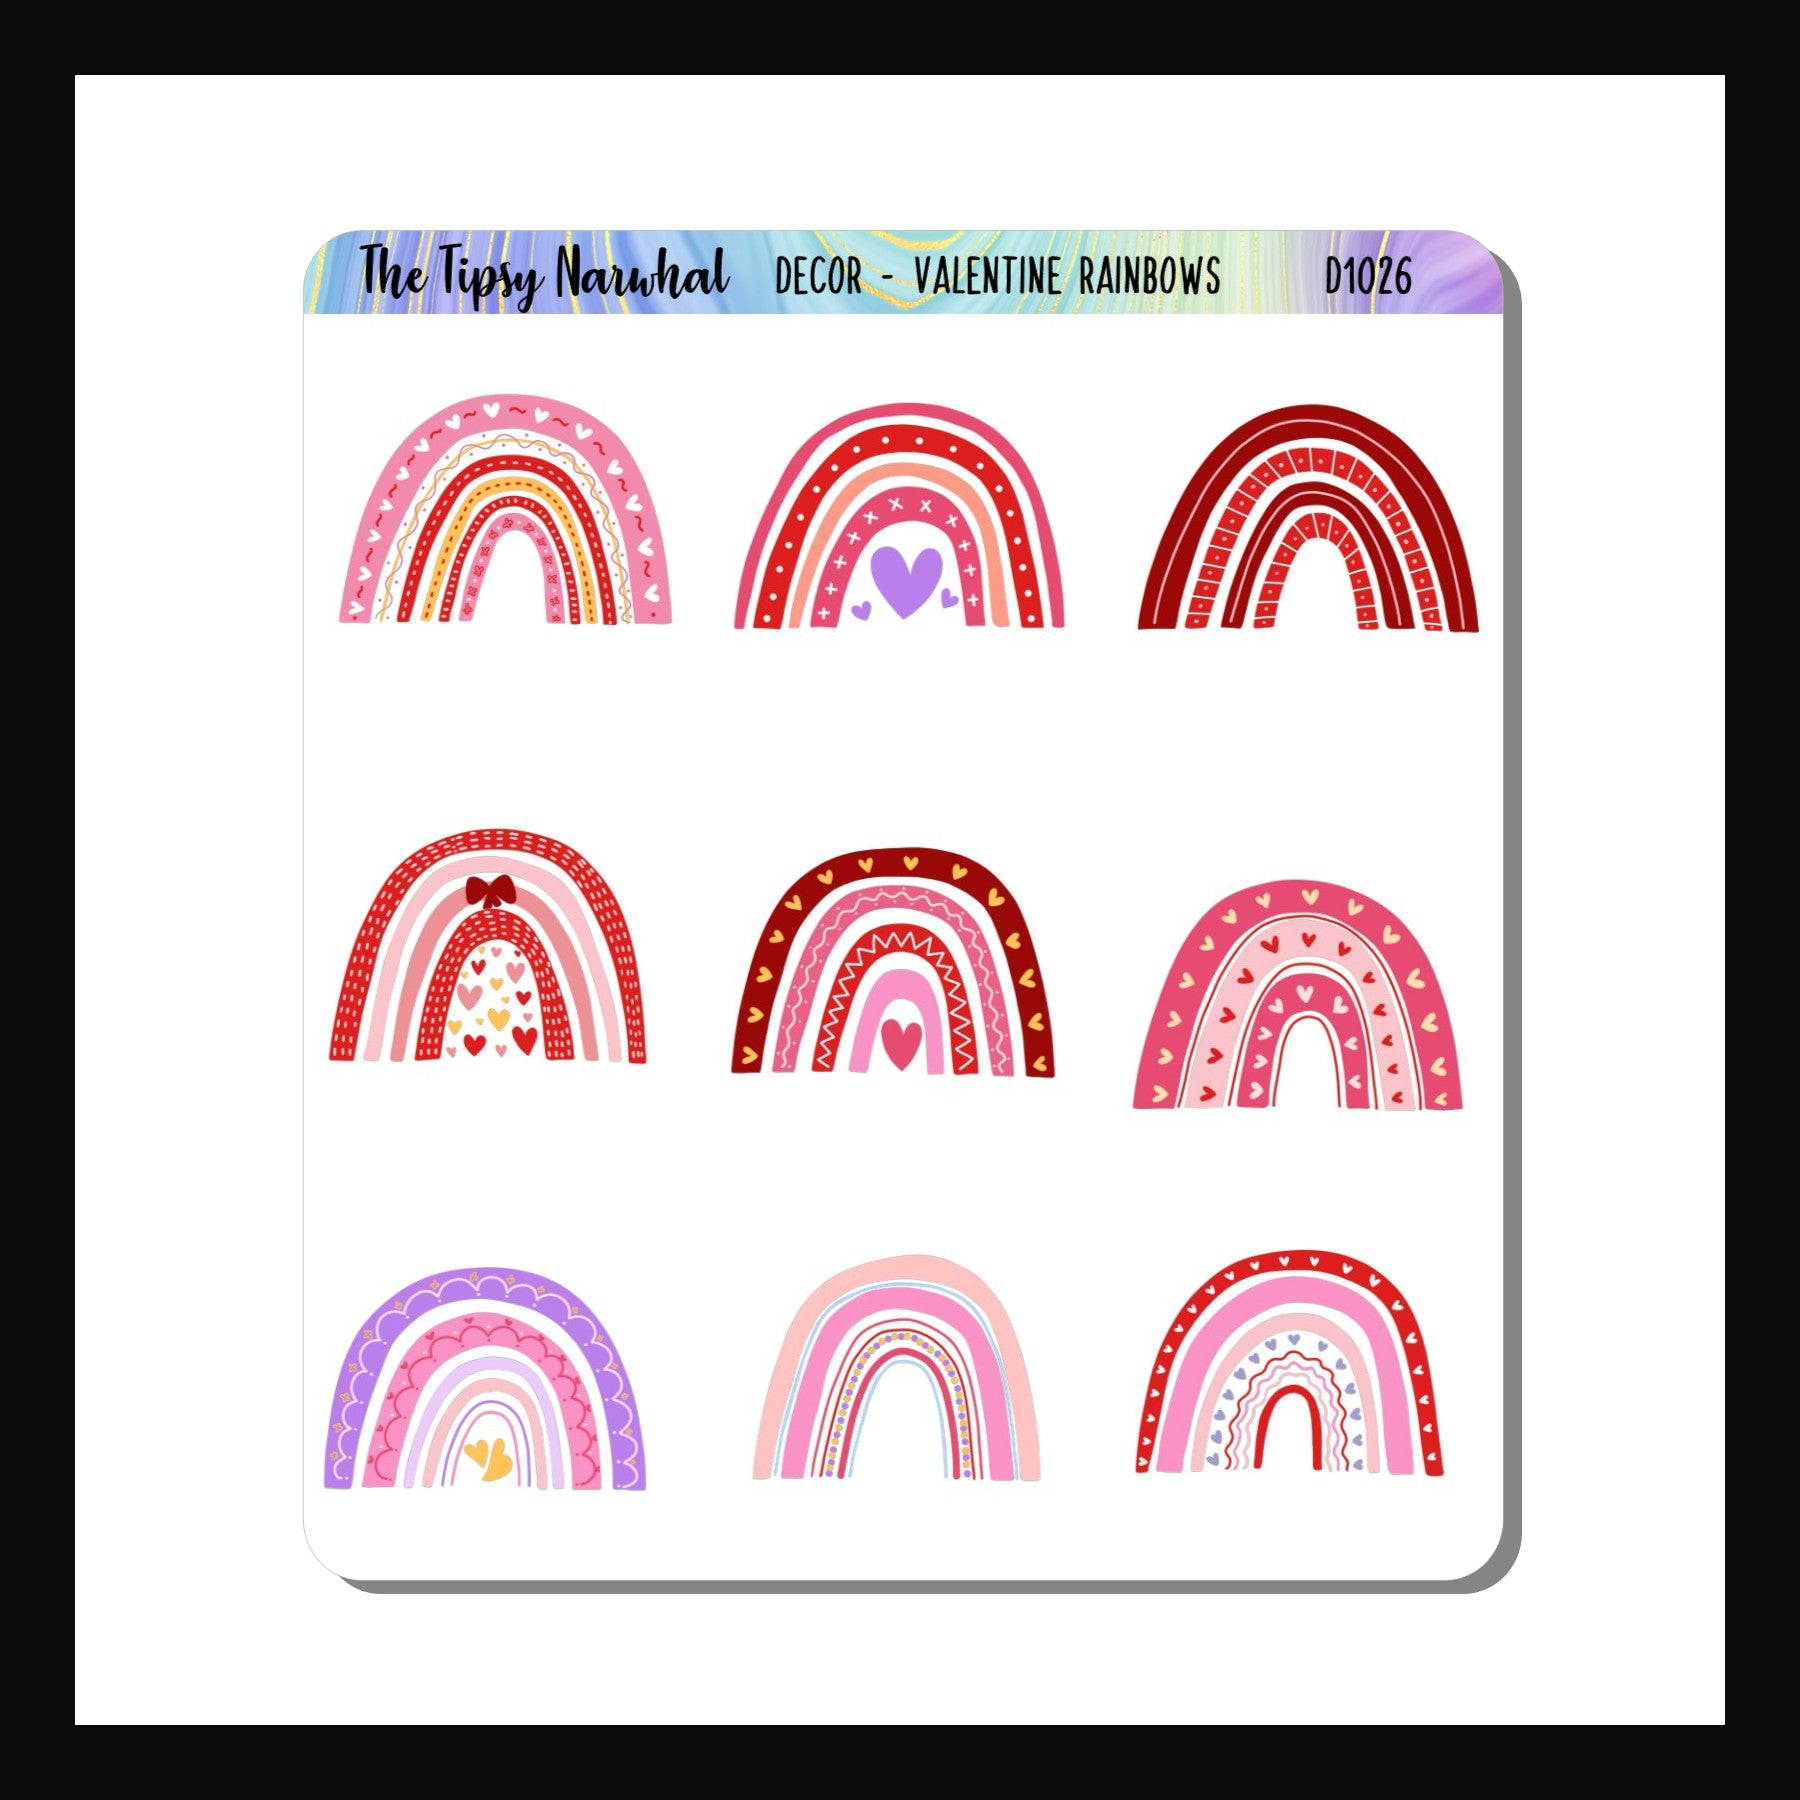 Valentine Rainbows Decor Sheet.  Set of 9 cheerful Valentine themed rainbow stickers.  Red, pink, and purple rainbows with hearts.  Perfect for planners and journals.